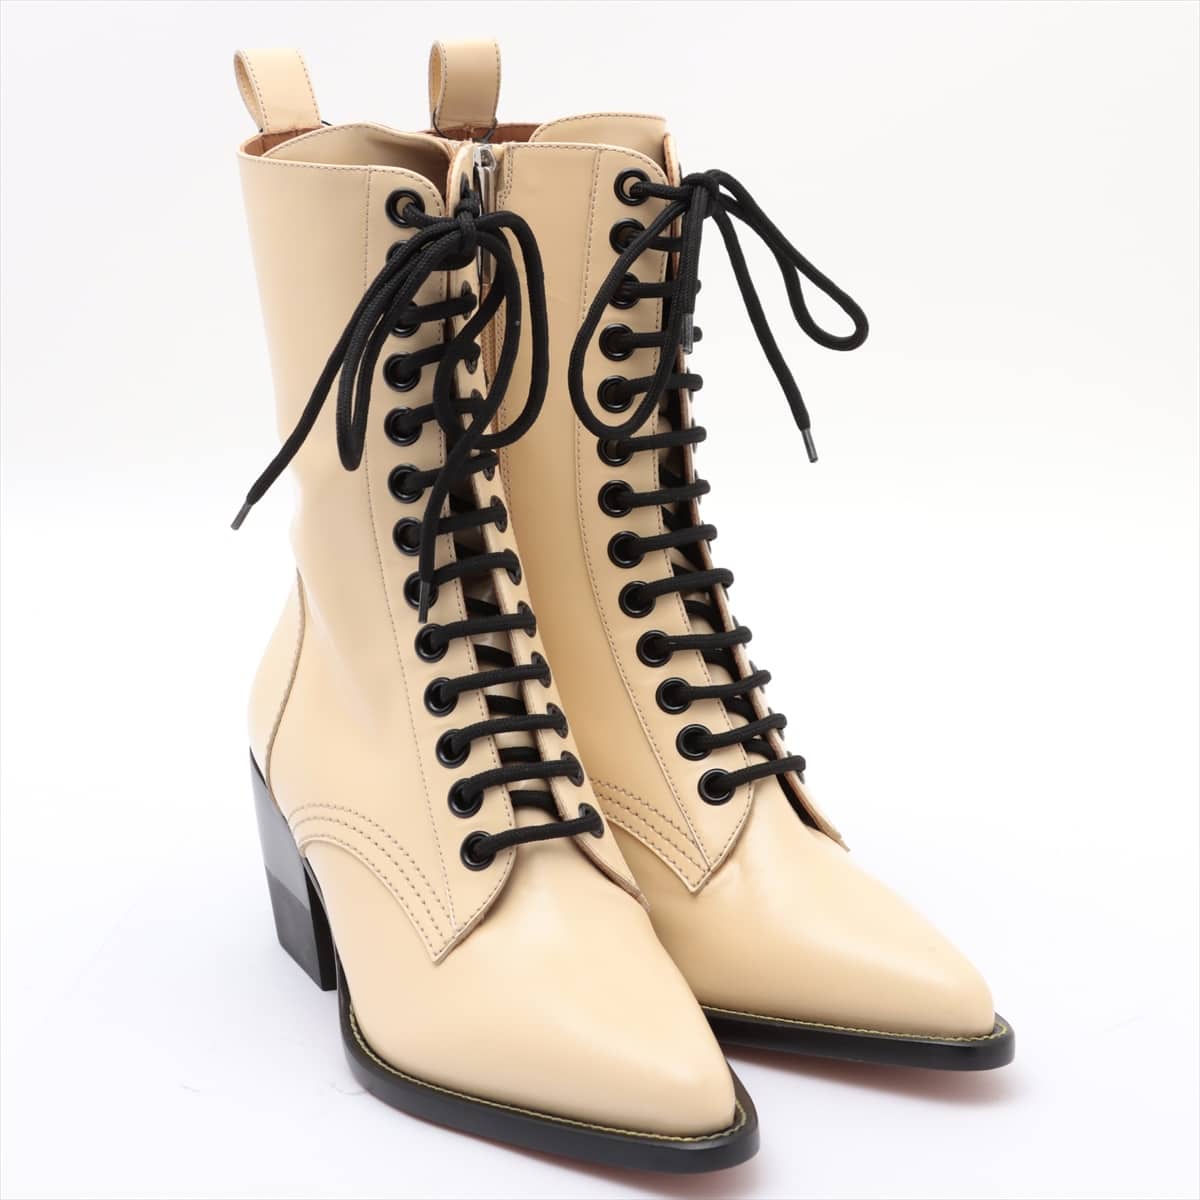 Chloe Leather Boots 39 Ladies' Yellow gold